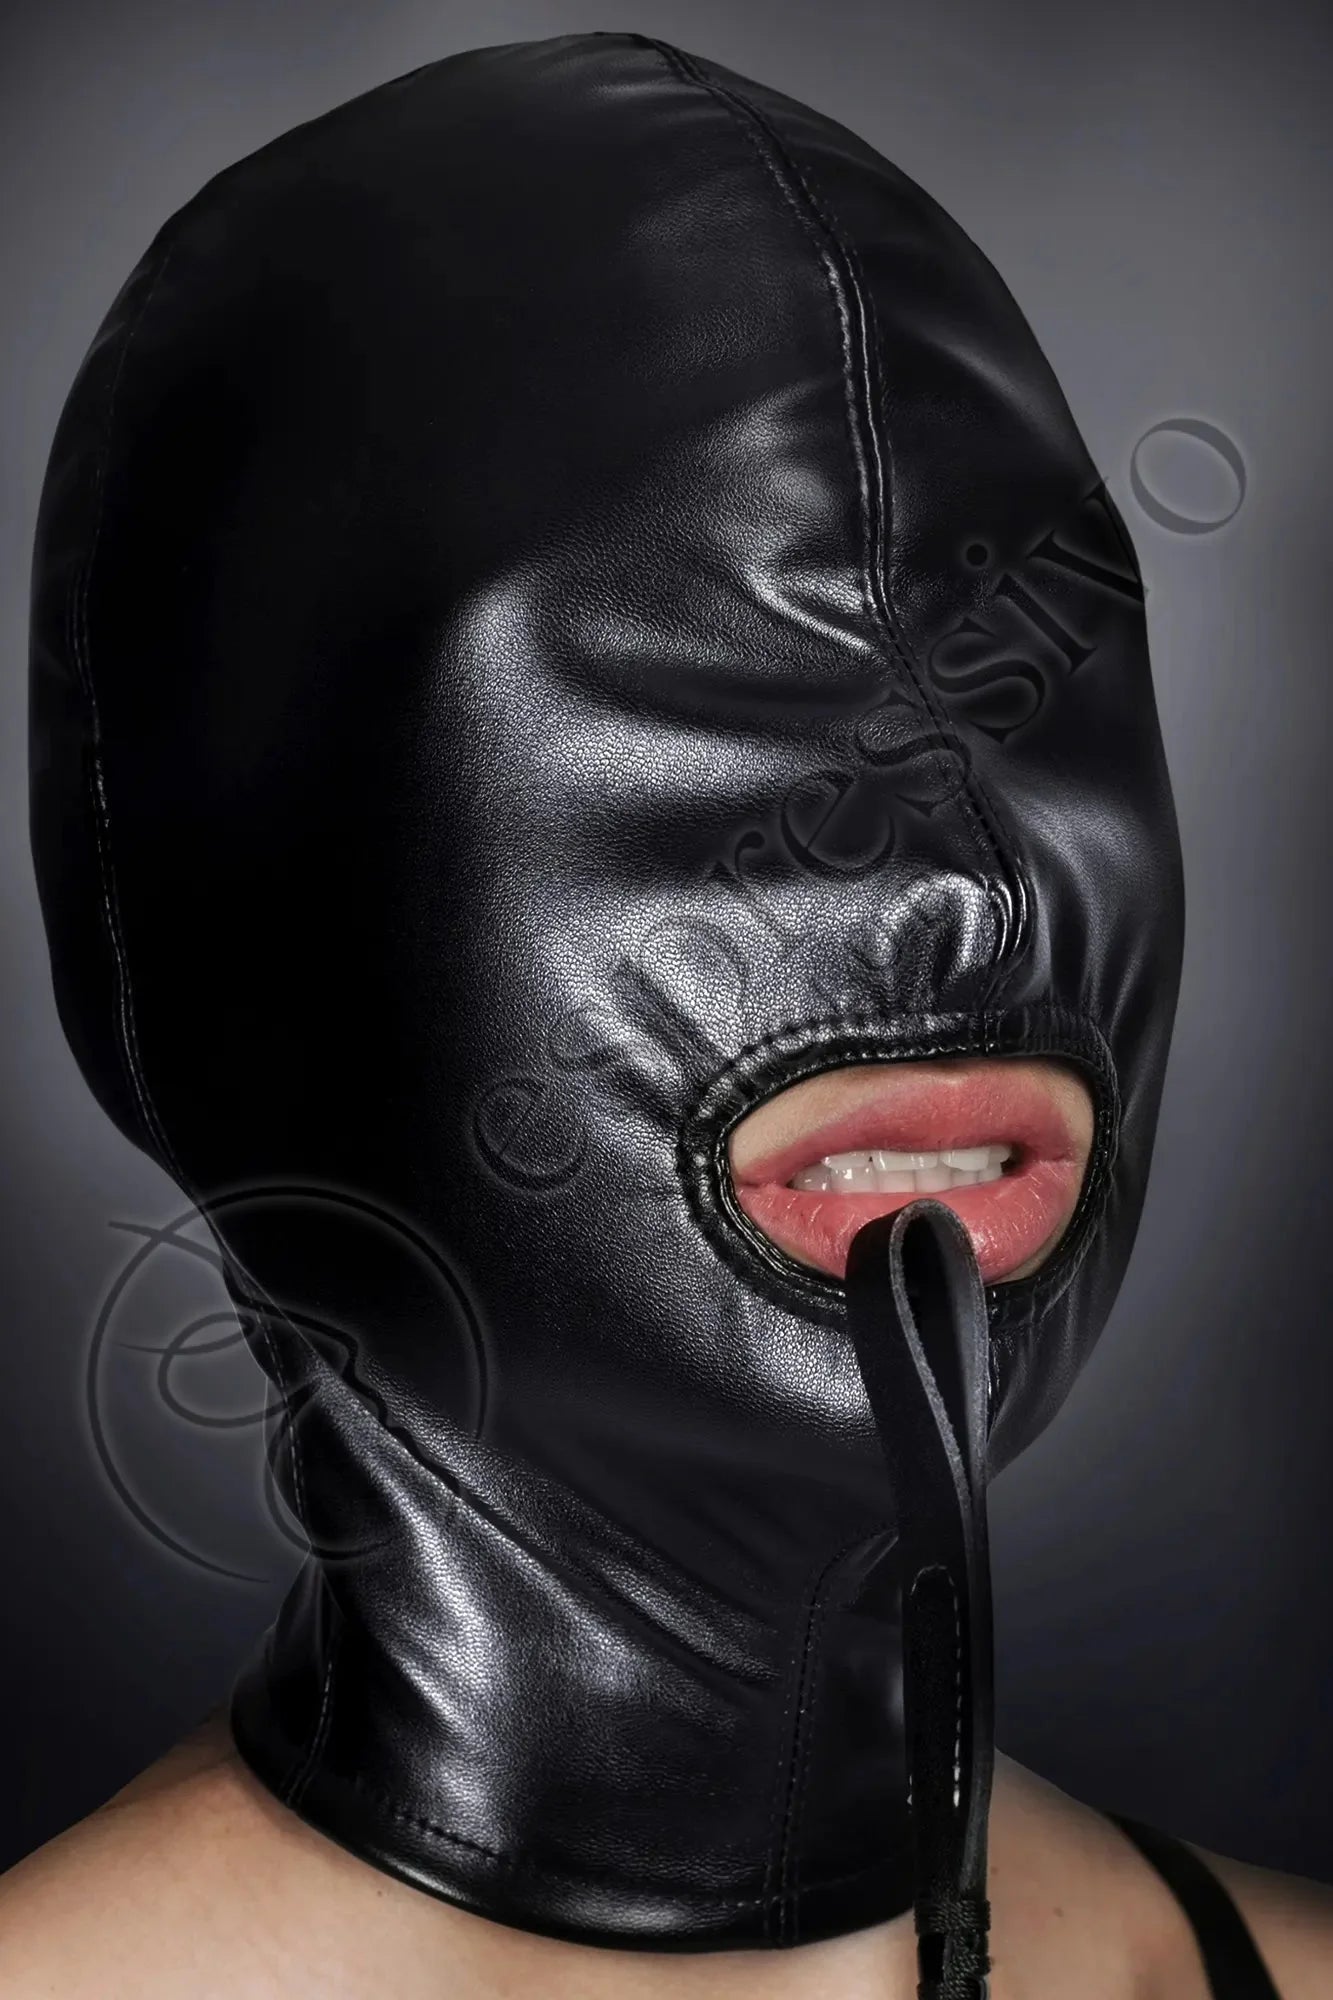 Open Mouth Cocksucker Hood for Extreme Bondage